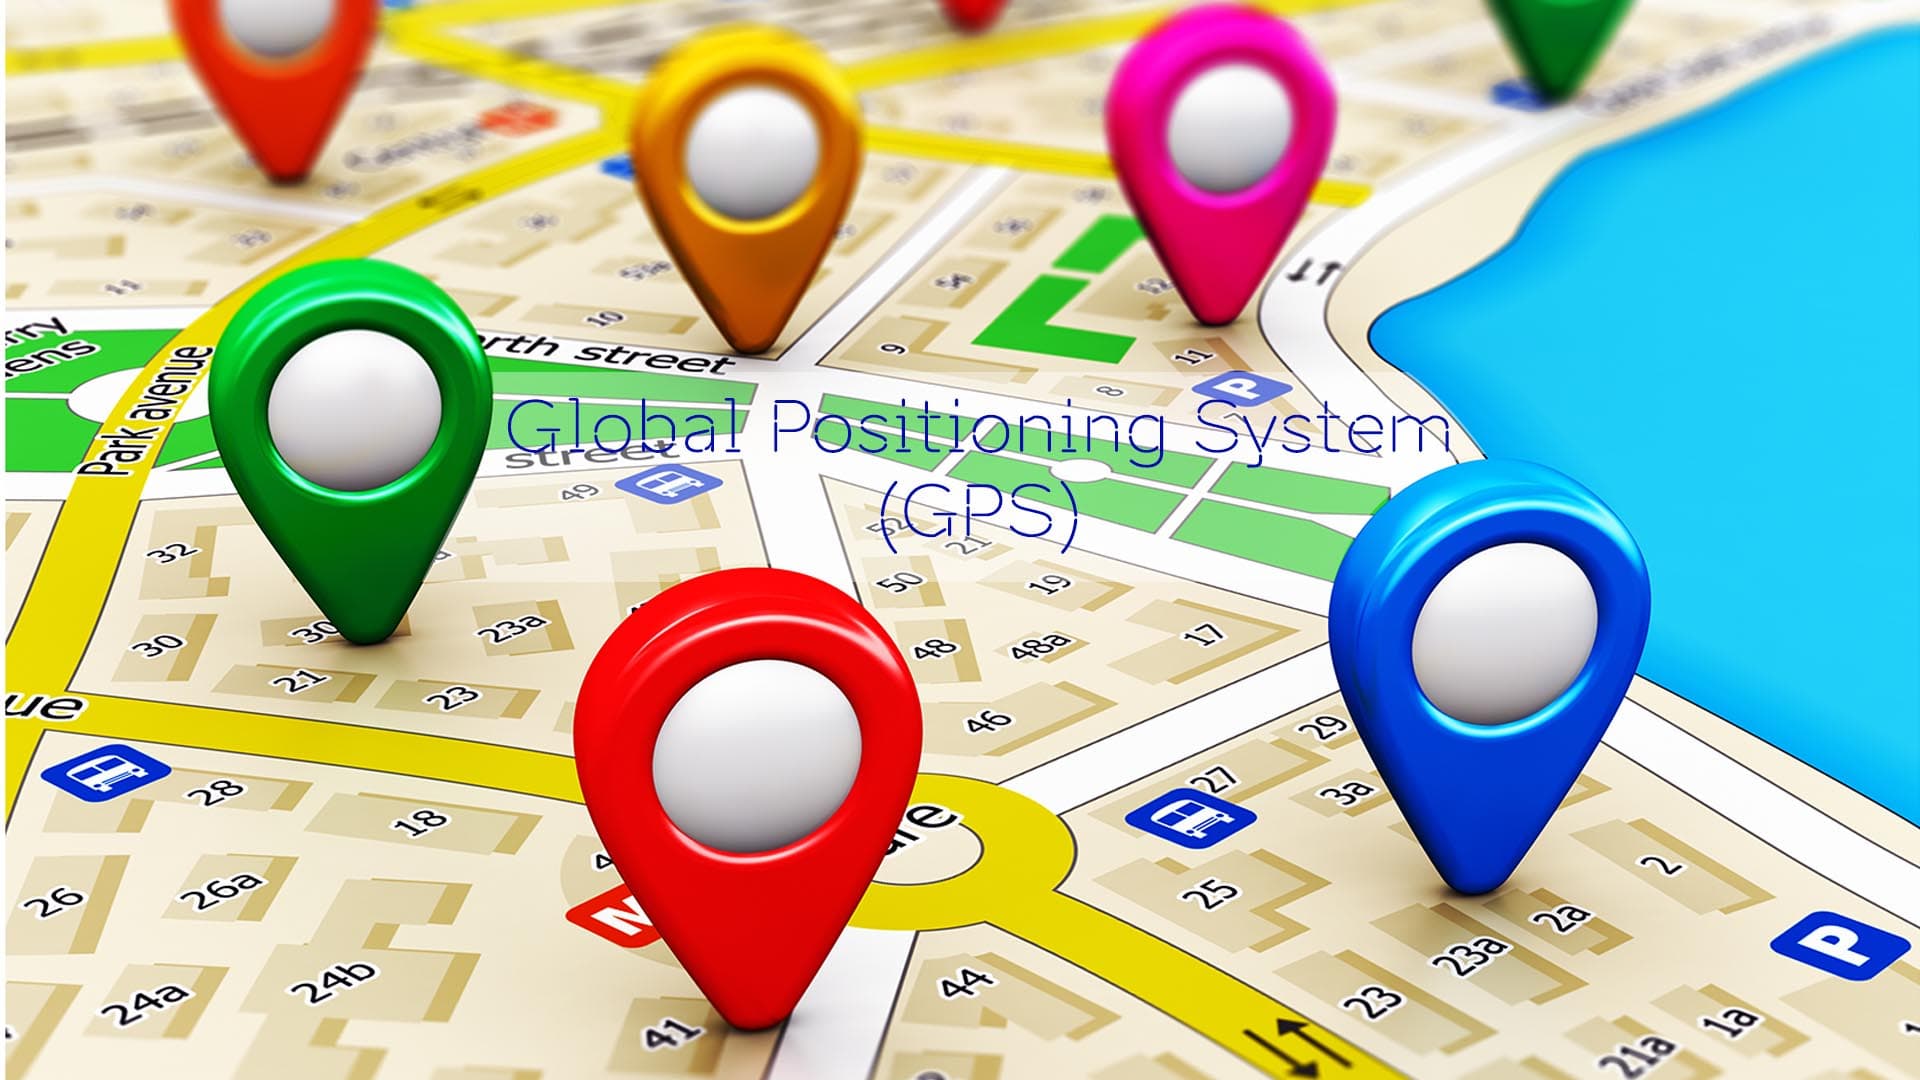 GPS(Global Positioning System) Mandatory Compliance of The Mobile Association